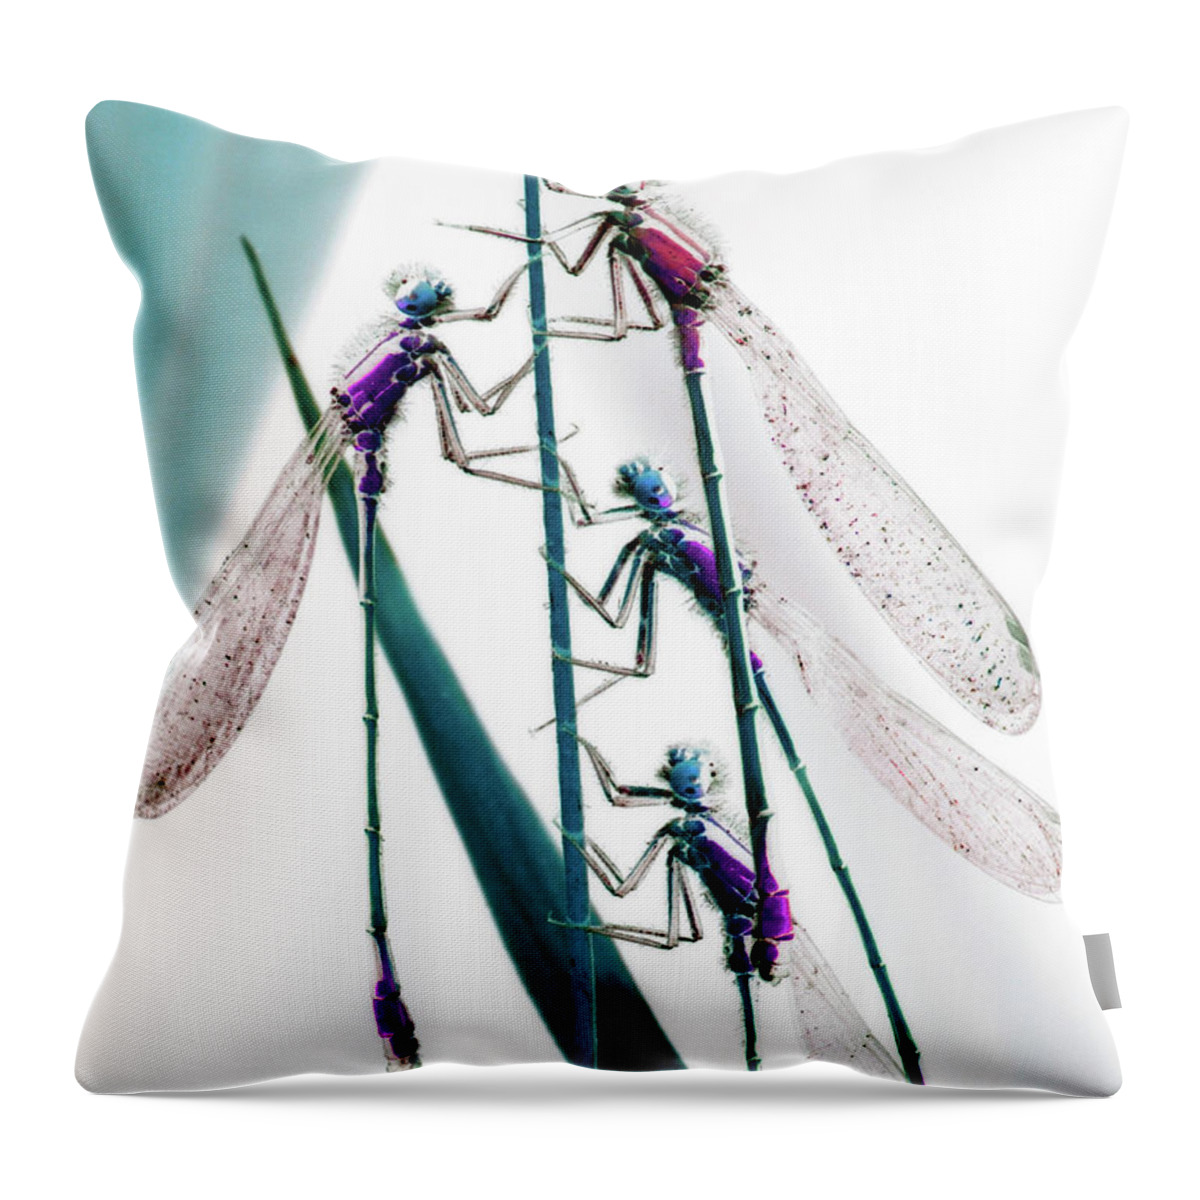 Grass Throw Pillow featuring the photograph Four Dragonflies Sit Upright On Stem by Win-initiative/neleman